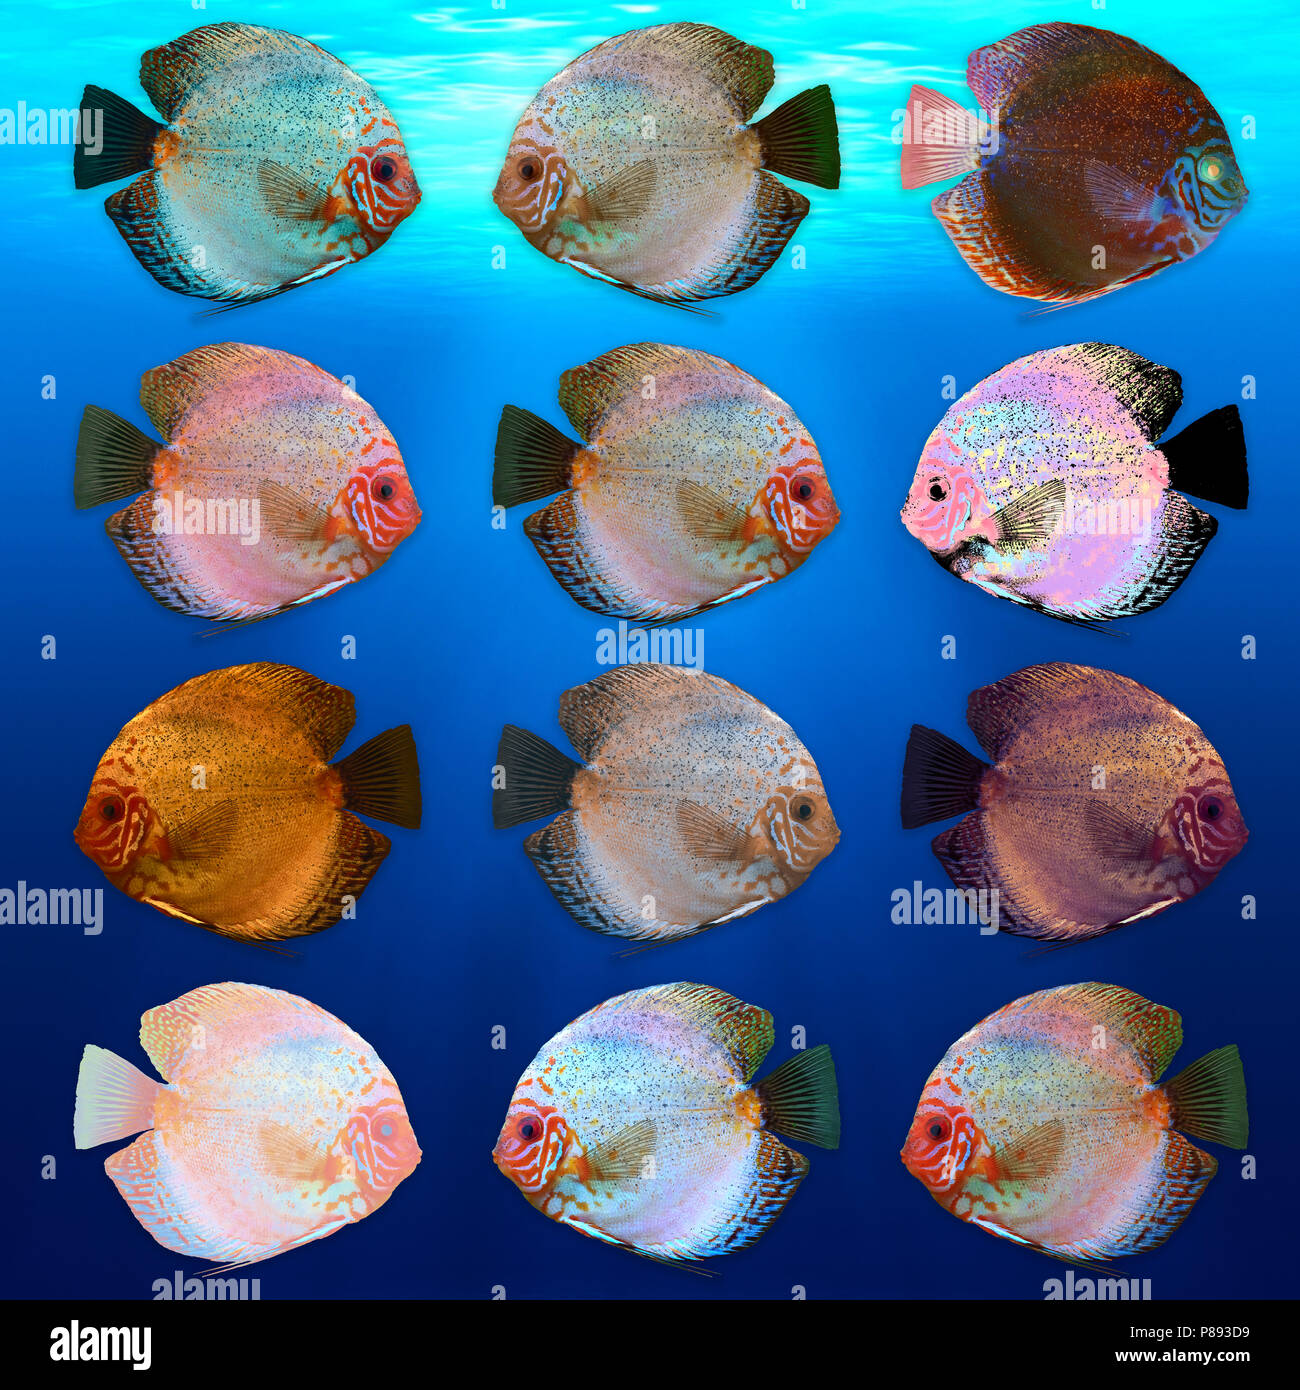 Digitally enhanced image of 12 color variations of Symphysodon, (colloquially known as discus) fresh water aquarium fish. Stock Photo